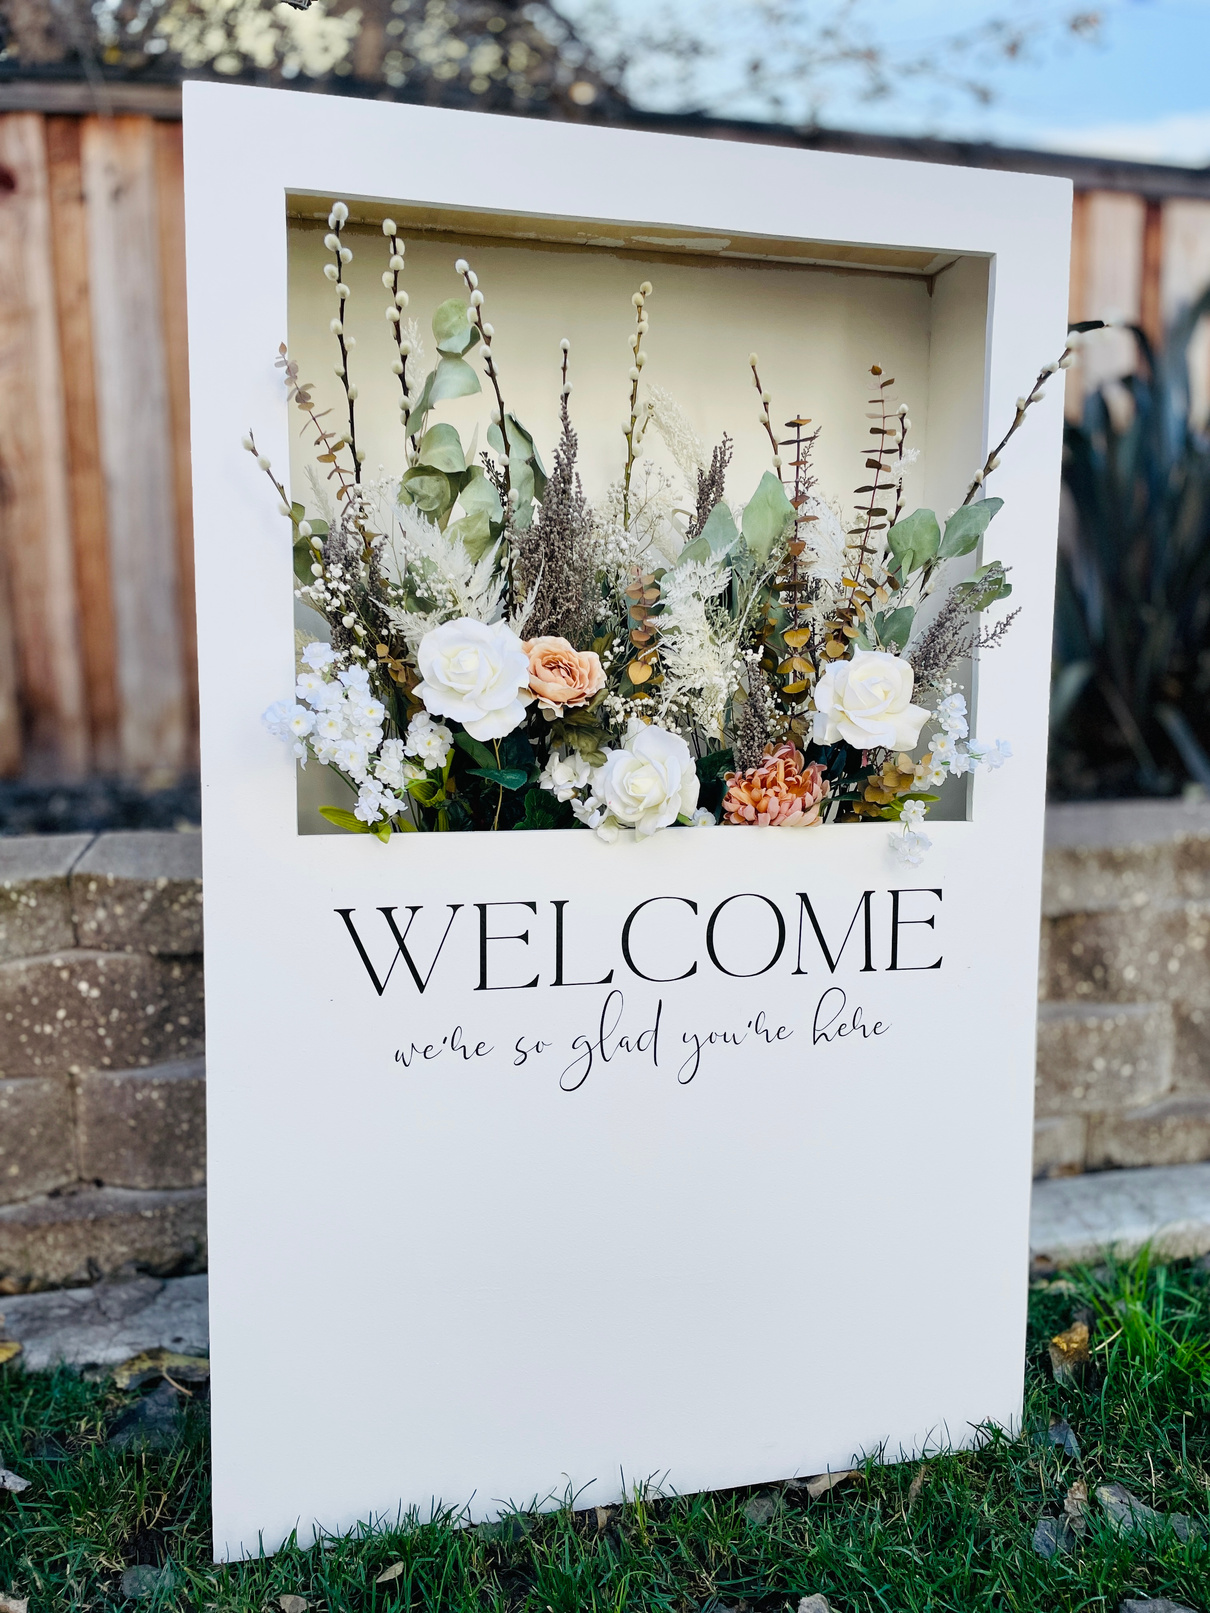 rental flower box  welcome sign for weddings, baby showers, bridal showers, engagement parties, birthday party